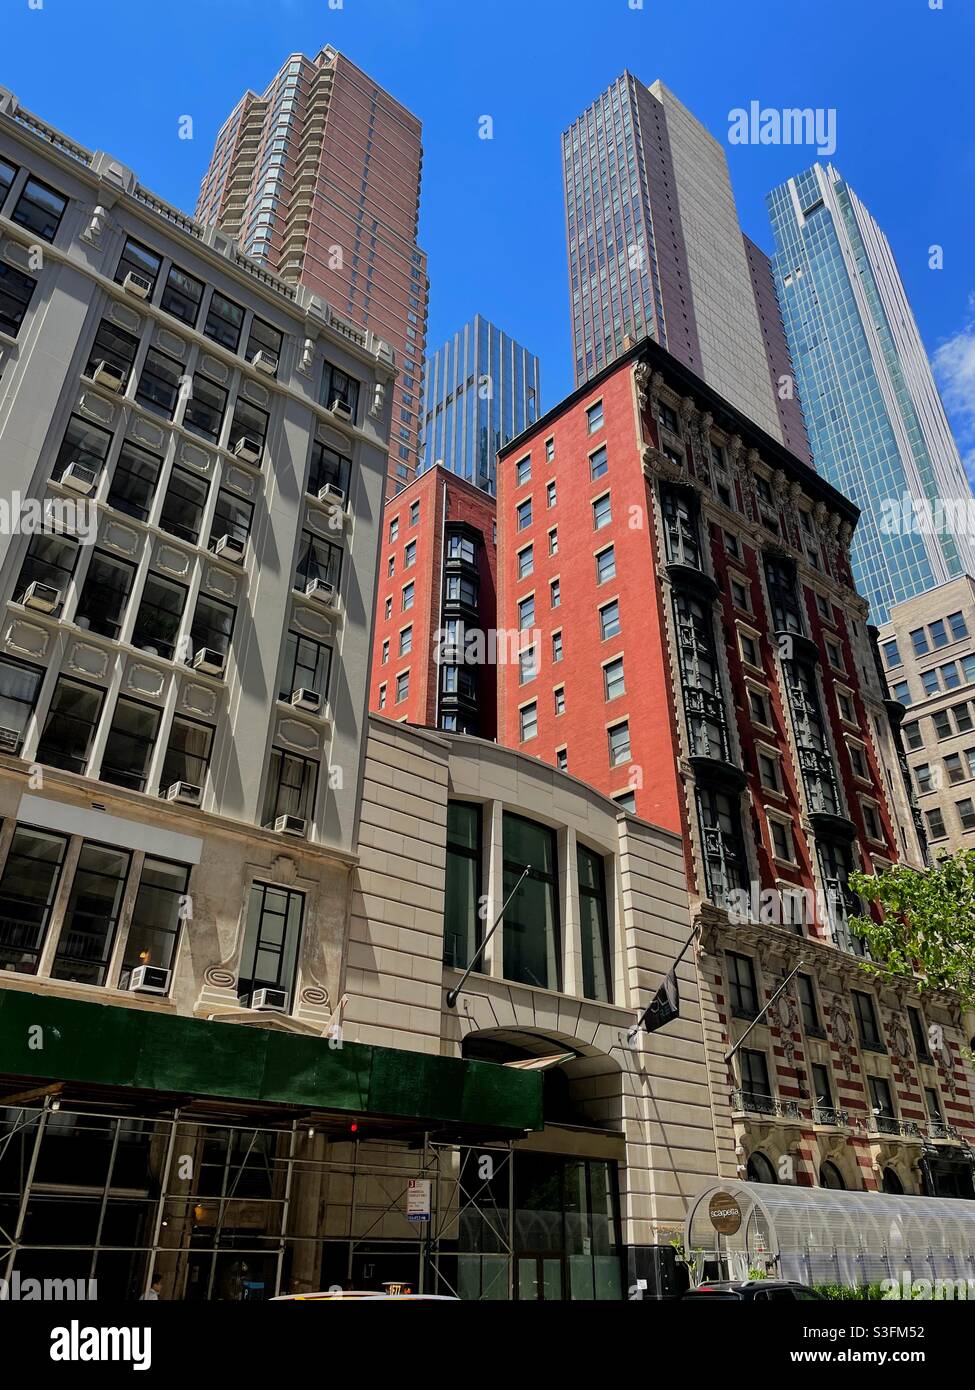 The James Hotel on Madison Avenue is located in the trendy neighborhood of nomad among towering condominiums, NYC, USA Stock Photo